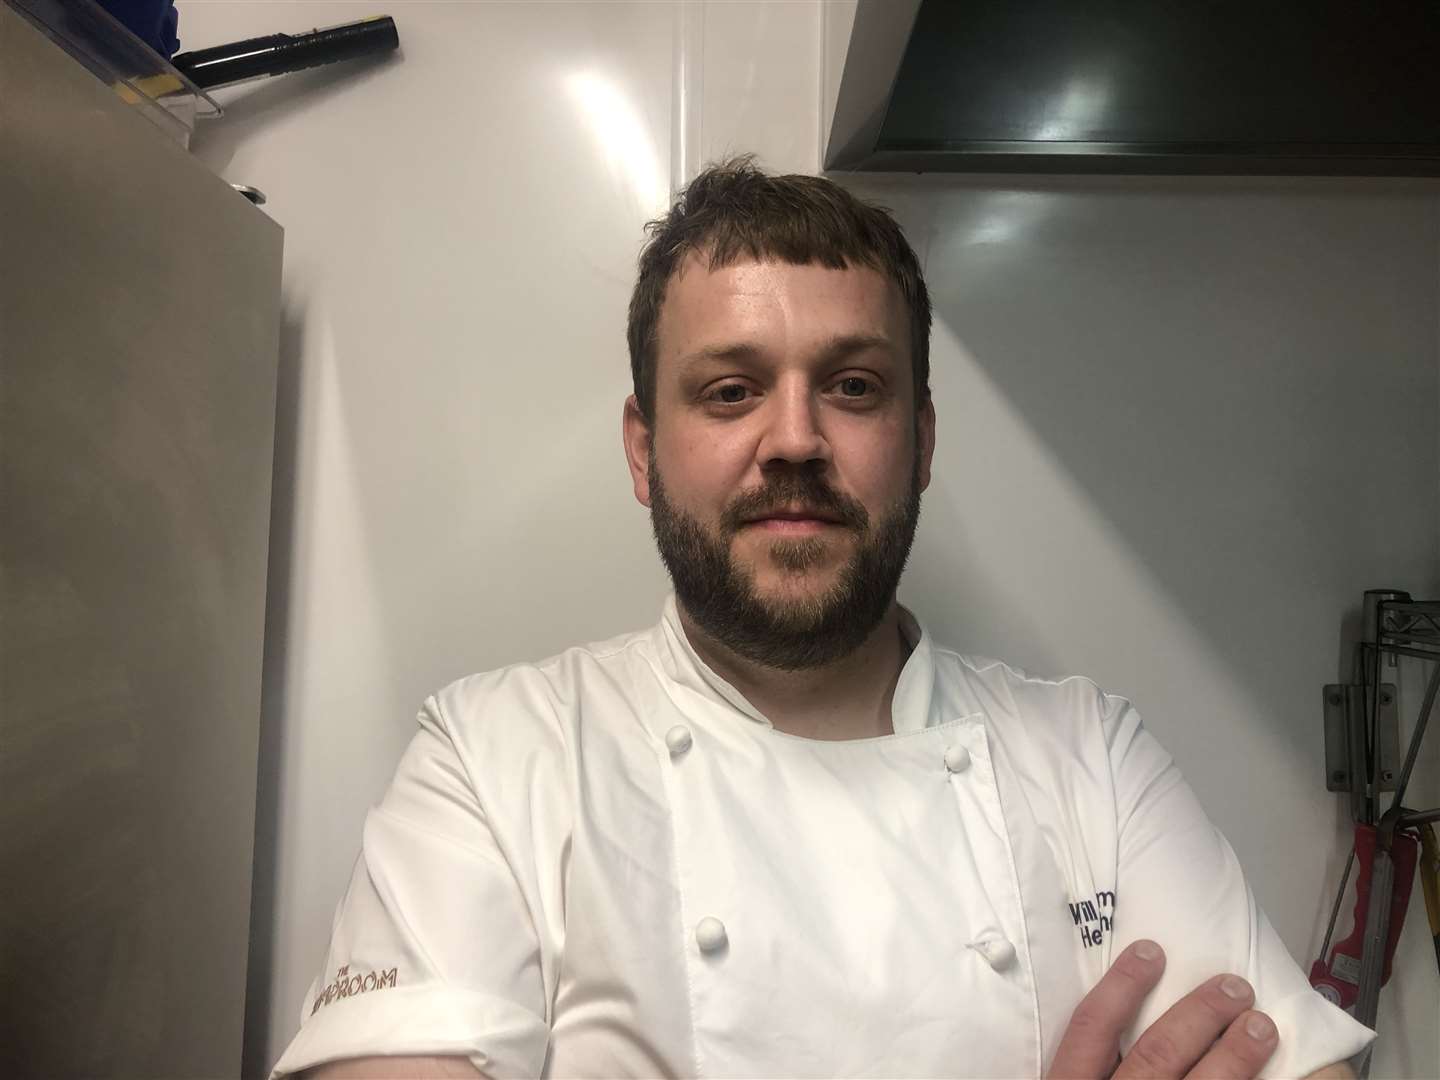 Head chef Will Freeman has been working at The Pumproom for two years